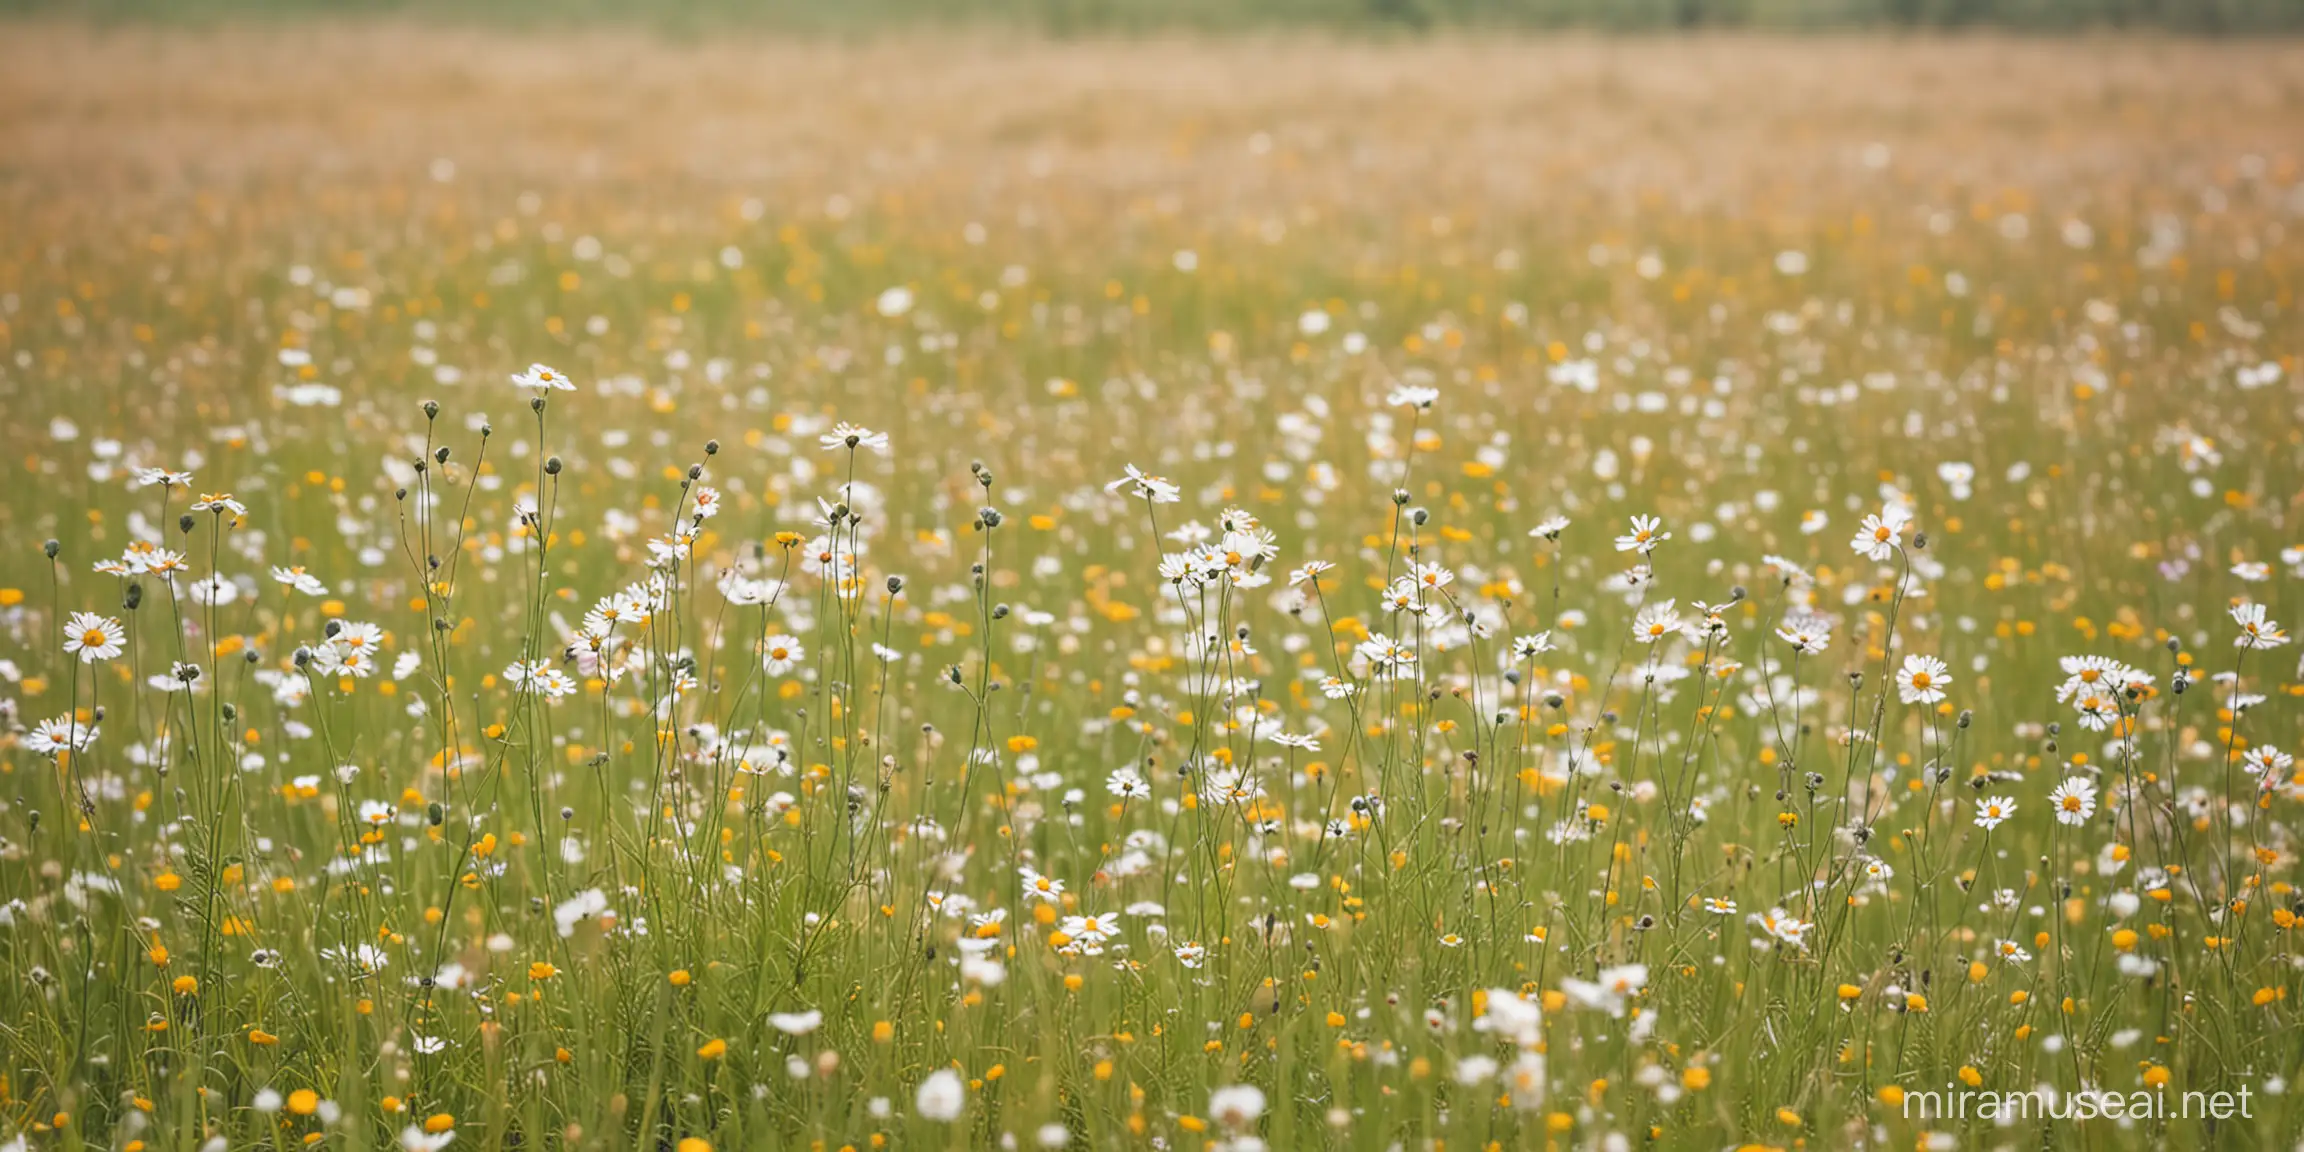 Beautiful Soft Flowers in a Tranquil Field Setting